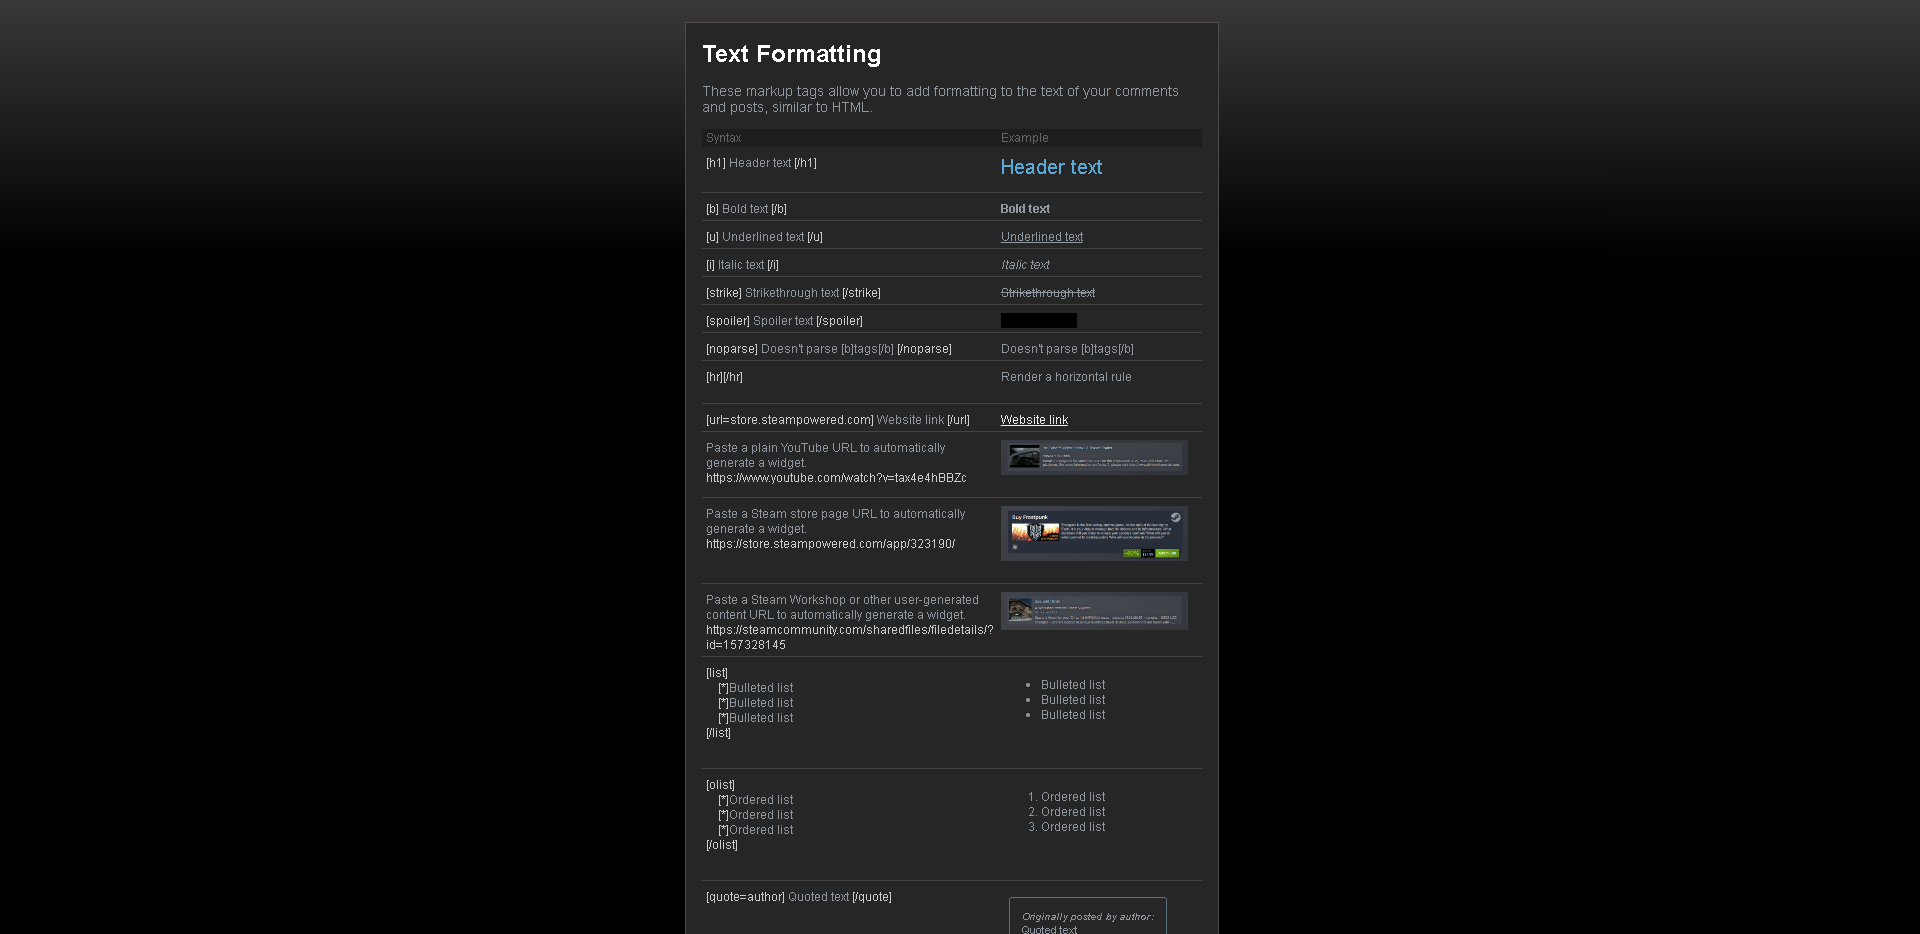 Picture showing the Text Formatting page on Steam